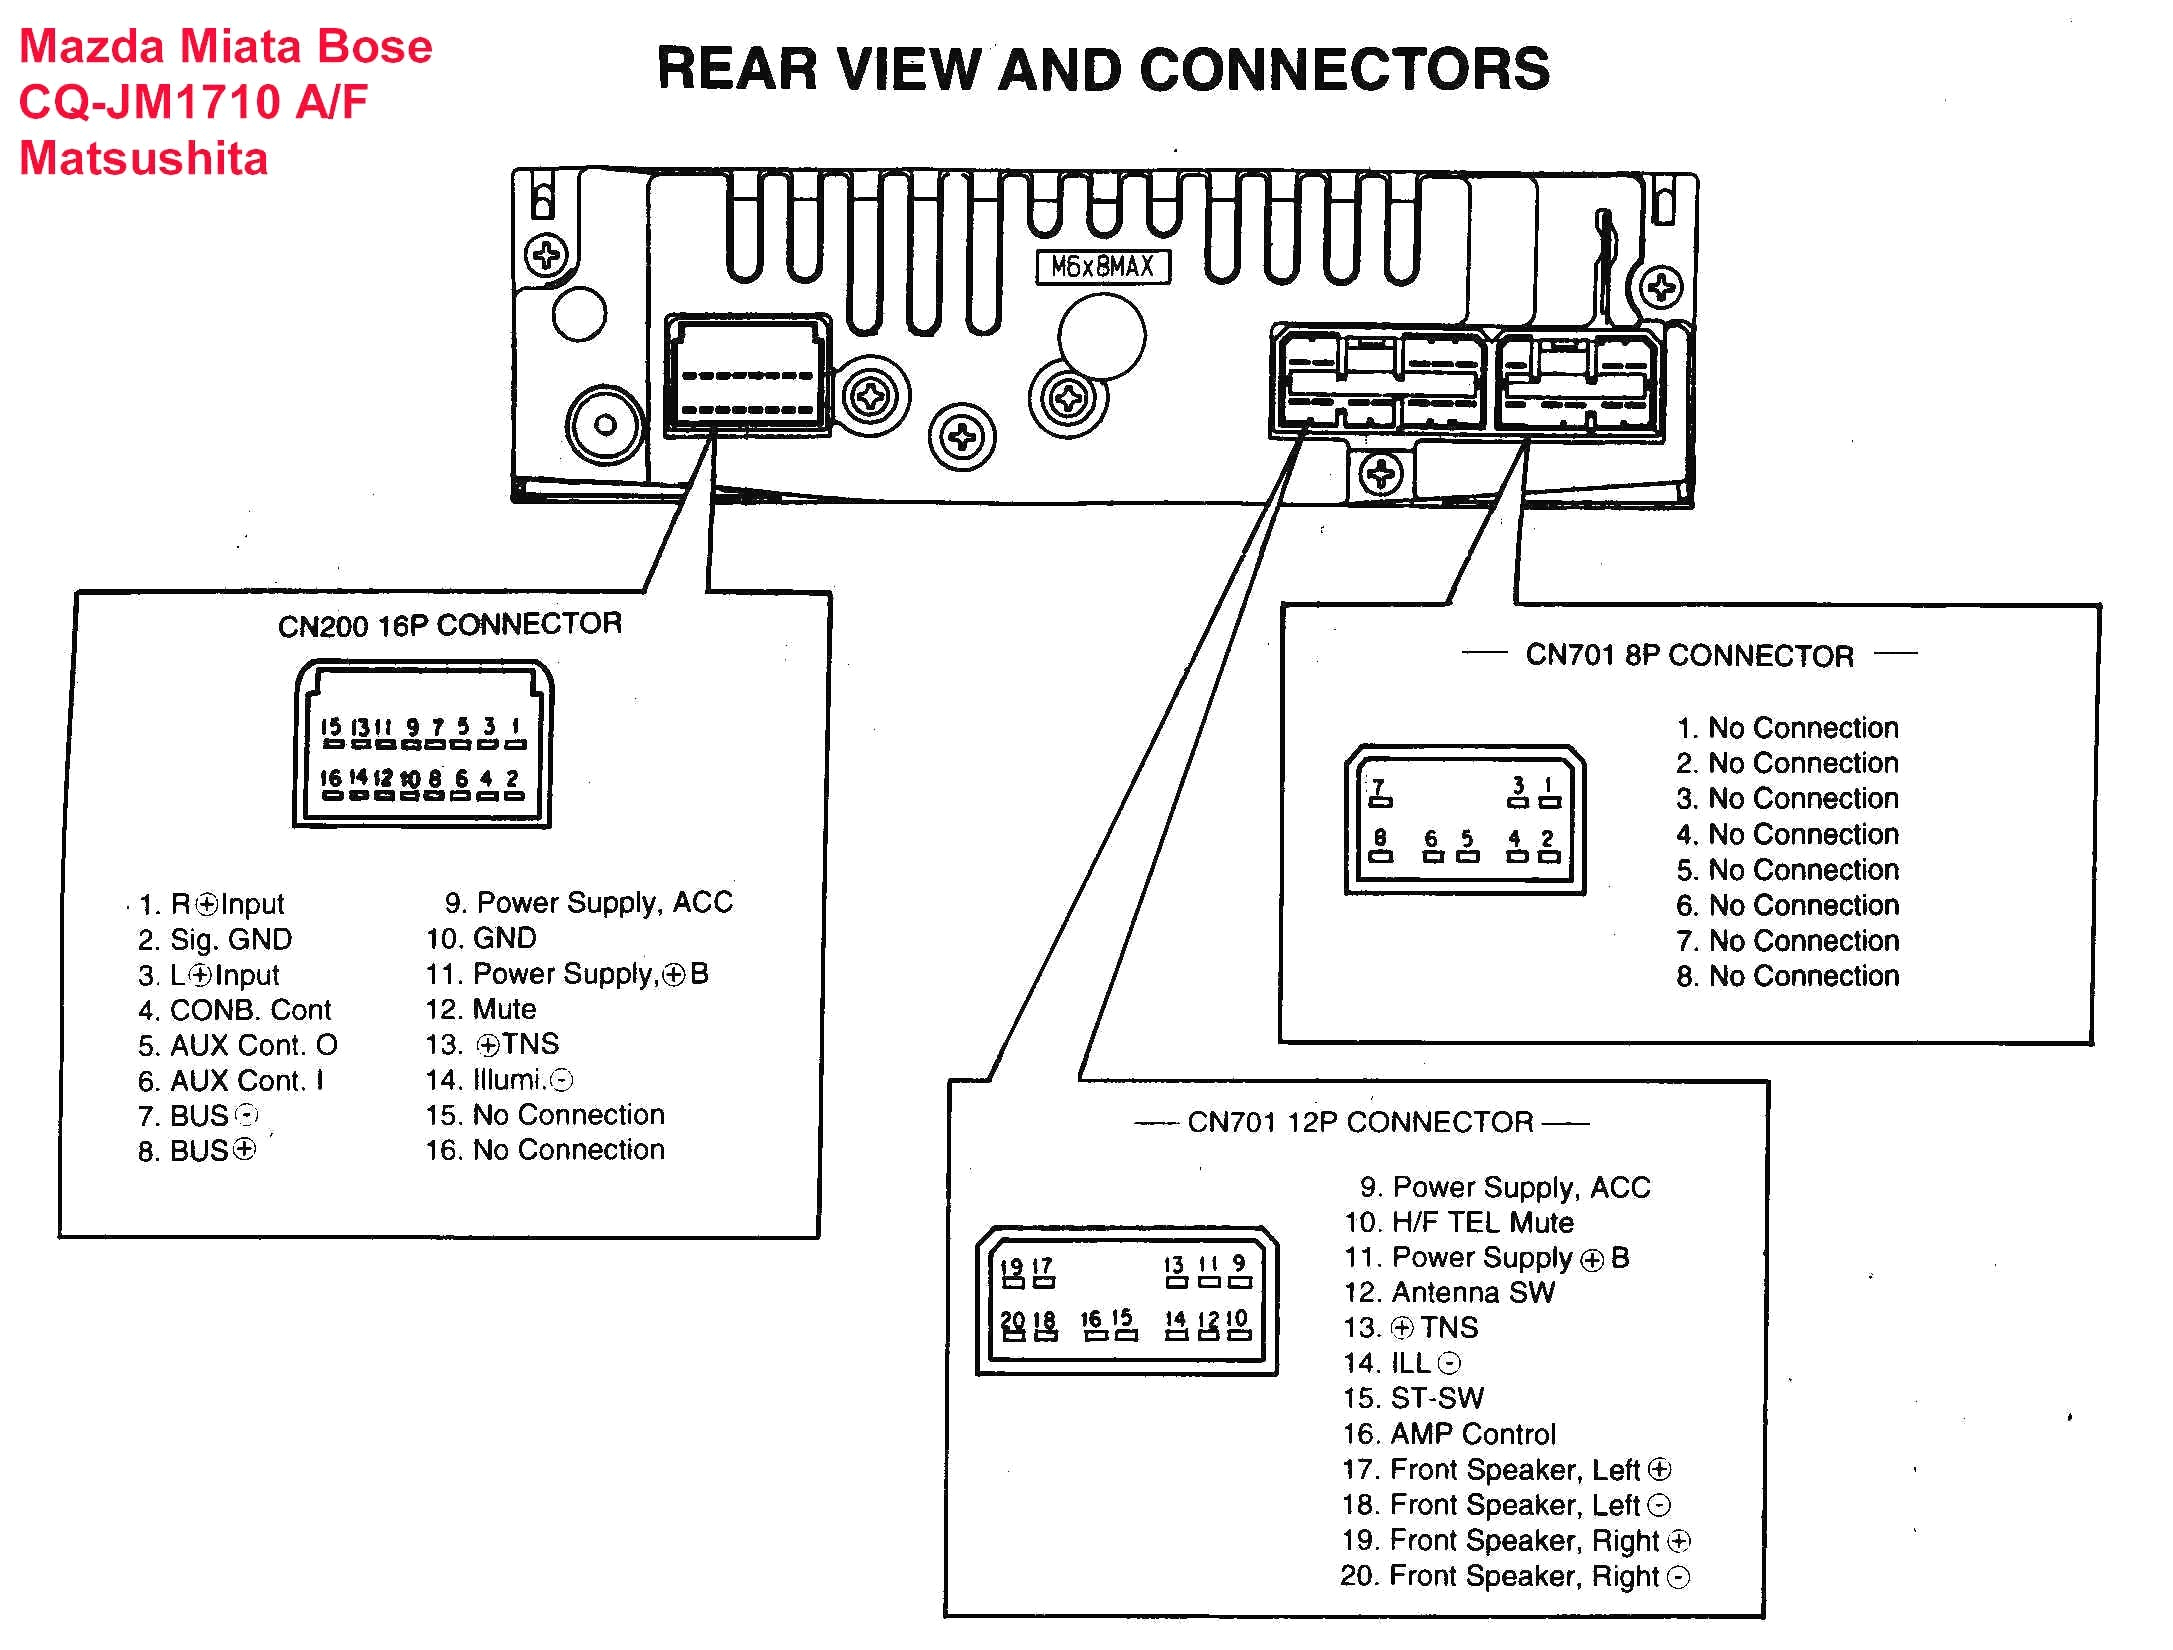 clarion stereo wiring diagram wiring diagrams konsult